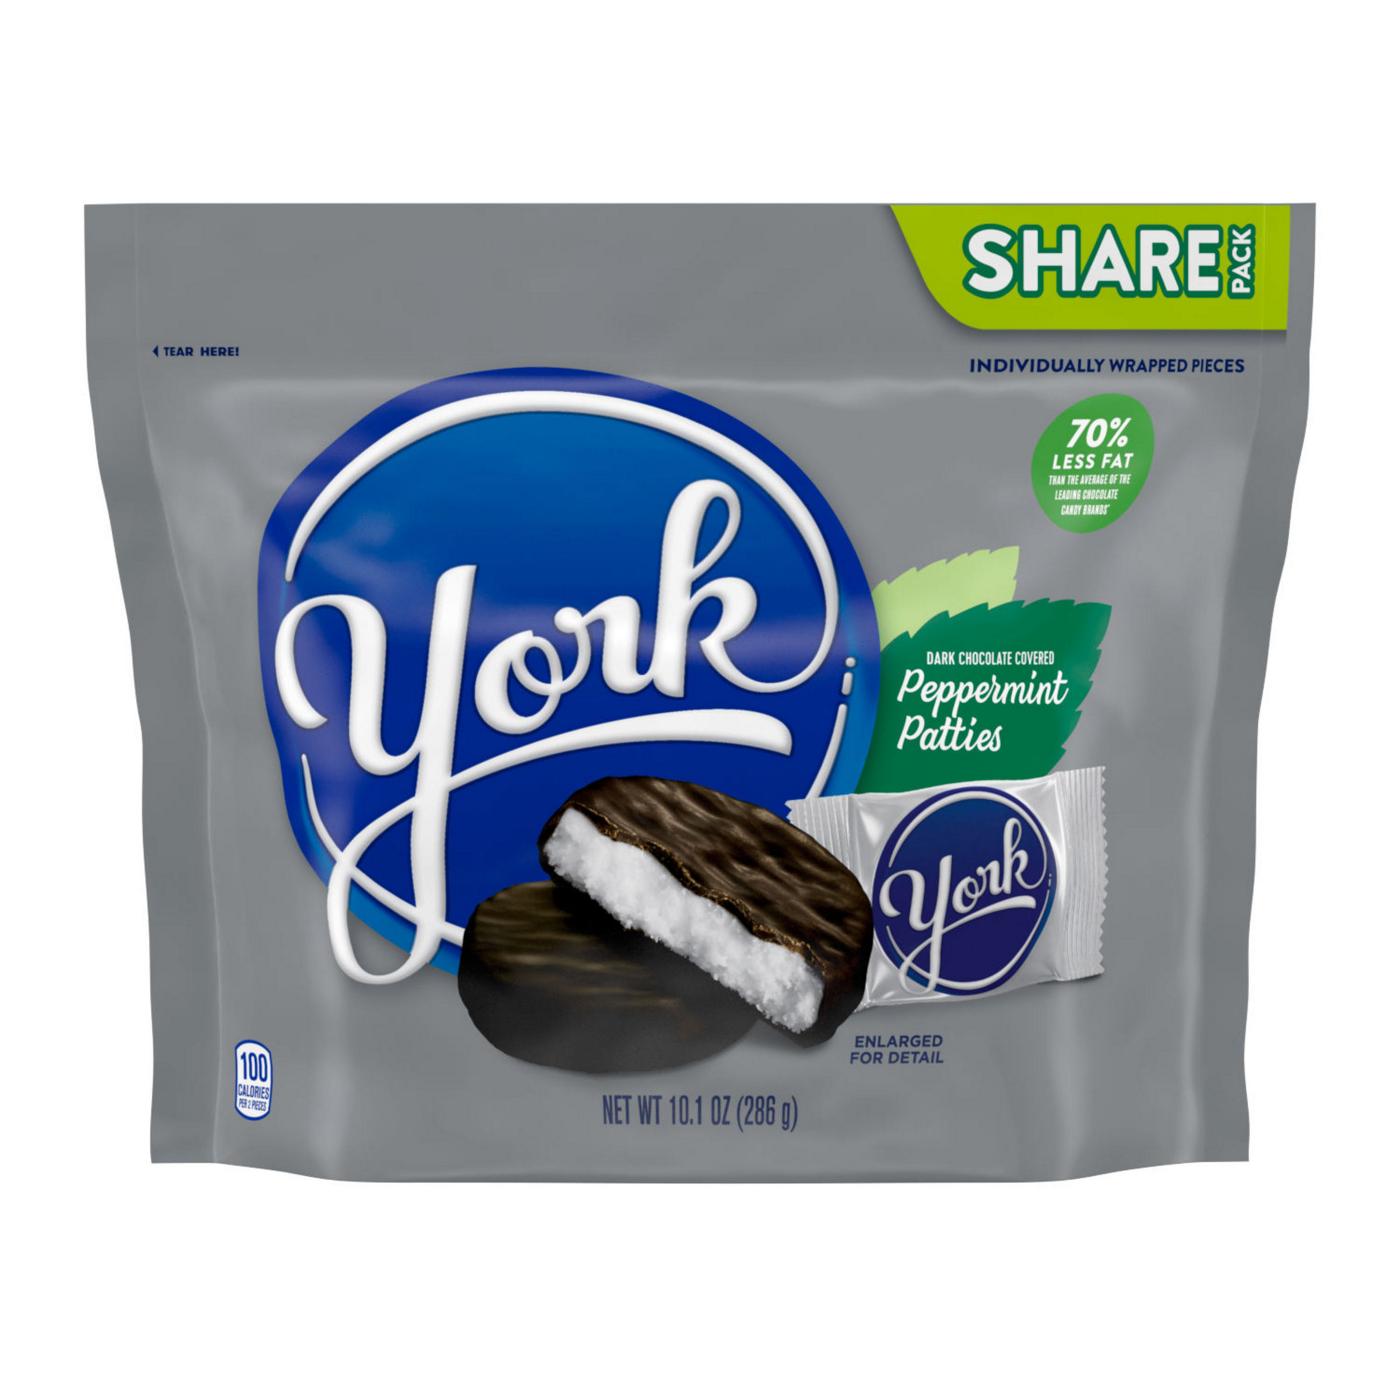 York Dark Chocolate Peppermint Patties Candy - Share Pack; image 1 of 7